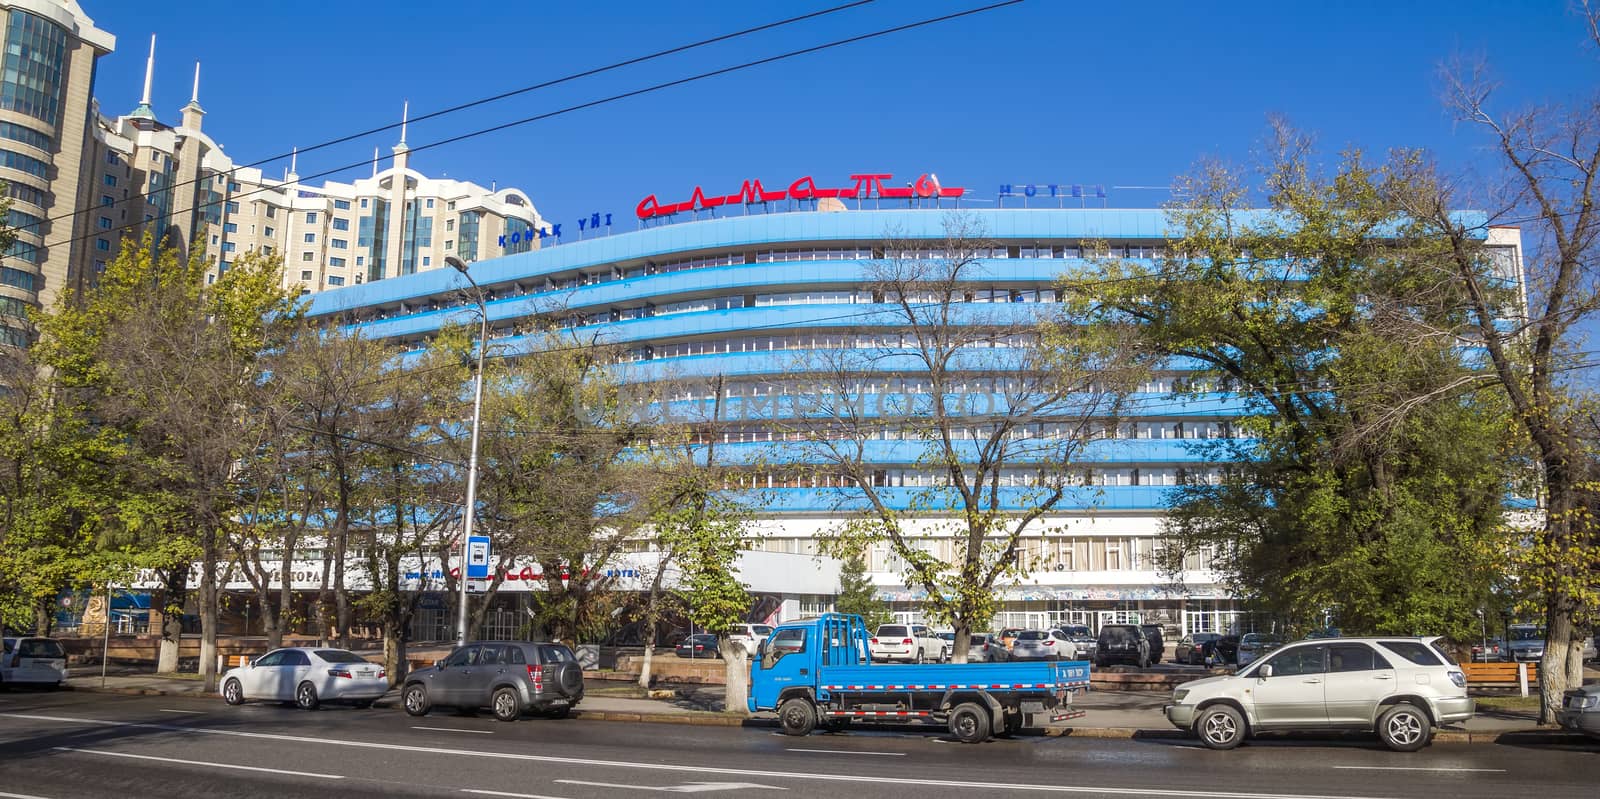 ALMATY, KAZAKHSTAN - OCTOBER 20, 2015: Hotel "Almaty" was built in the late 60s of the last century and is a historical, architectural monument.

Almaty, Kazakhstan - October 20, 2015: Hotel "Almaty" was built in the late 60s of the last century and is a historical, architectural monument.